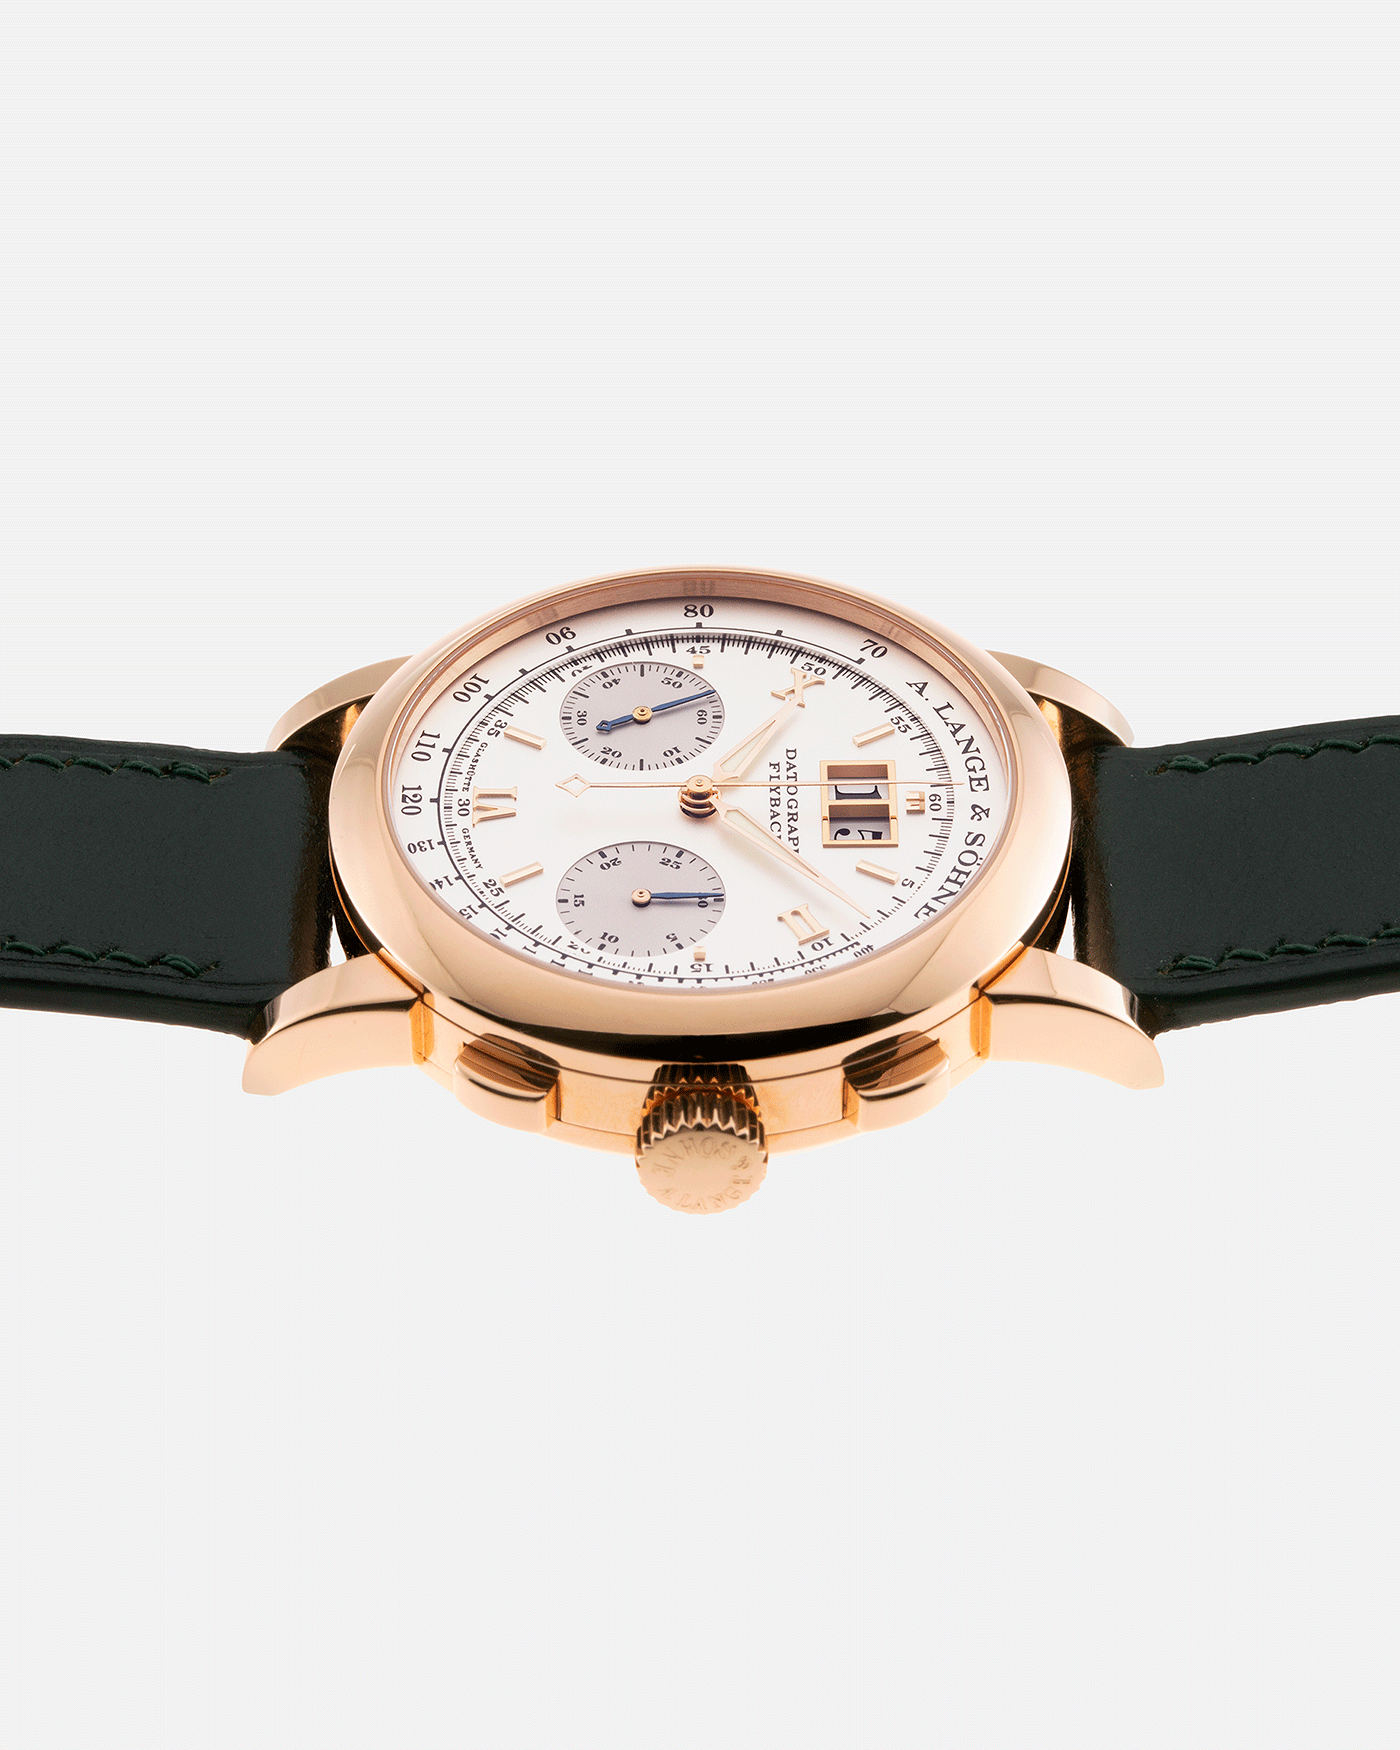 Brand: A. Lange & Sohne Year: 2009 Model: Datograph Reference Number: 403.032 Material: 18k Rose Gold Movement: Manual Winding L951.1 Case Diameter: 39mm Bracelet/Strap: Delugs Green Leather Strap with signed 18k Rose Gold Tang Buckle